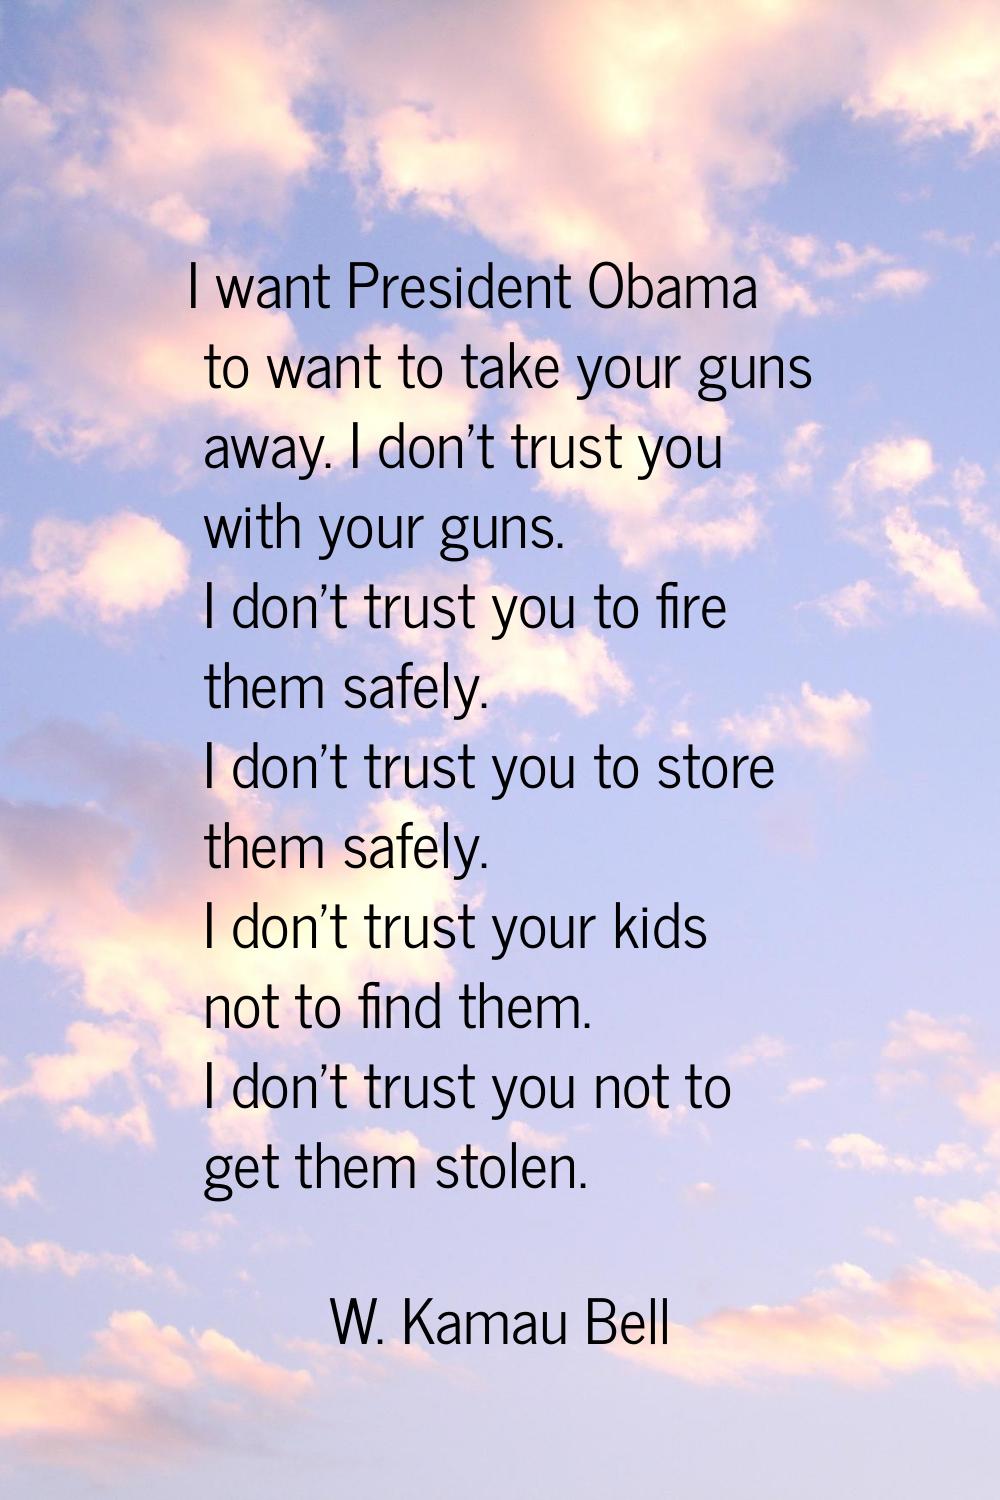 I want President Obama to want to take your guns away. I don't trust you with your guns. I don't tr